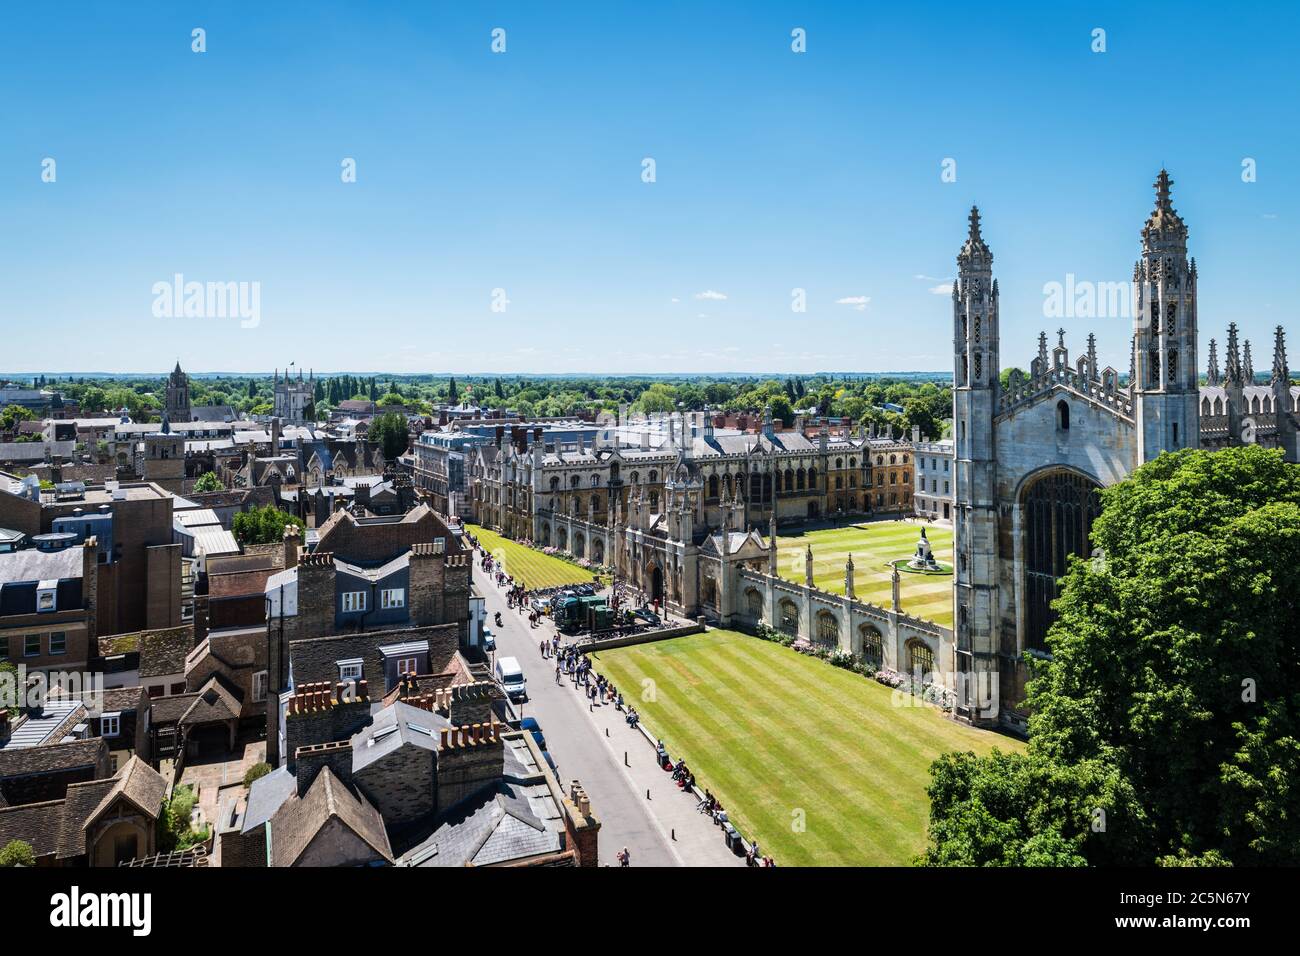 CAMBRIDGE, UK - JUNE 22, 2018: Aerial view of King’s College Chapel in Cambridge, one of the greatest examples of late Gothic English architecture. Stock Photo